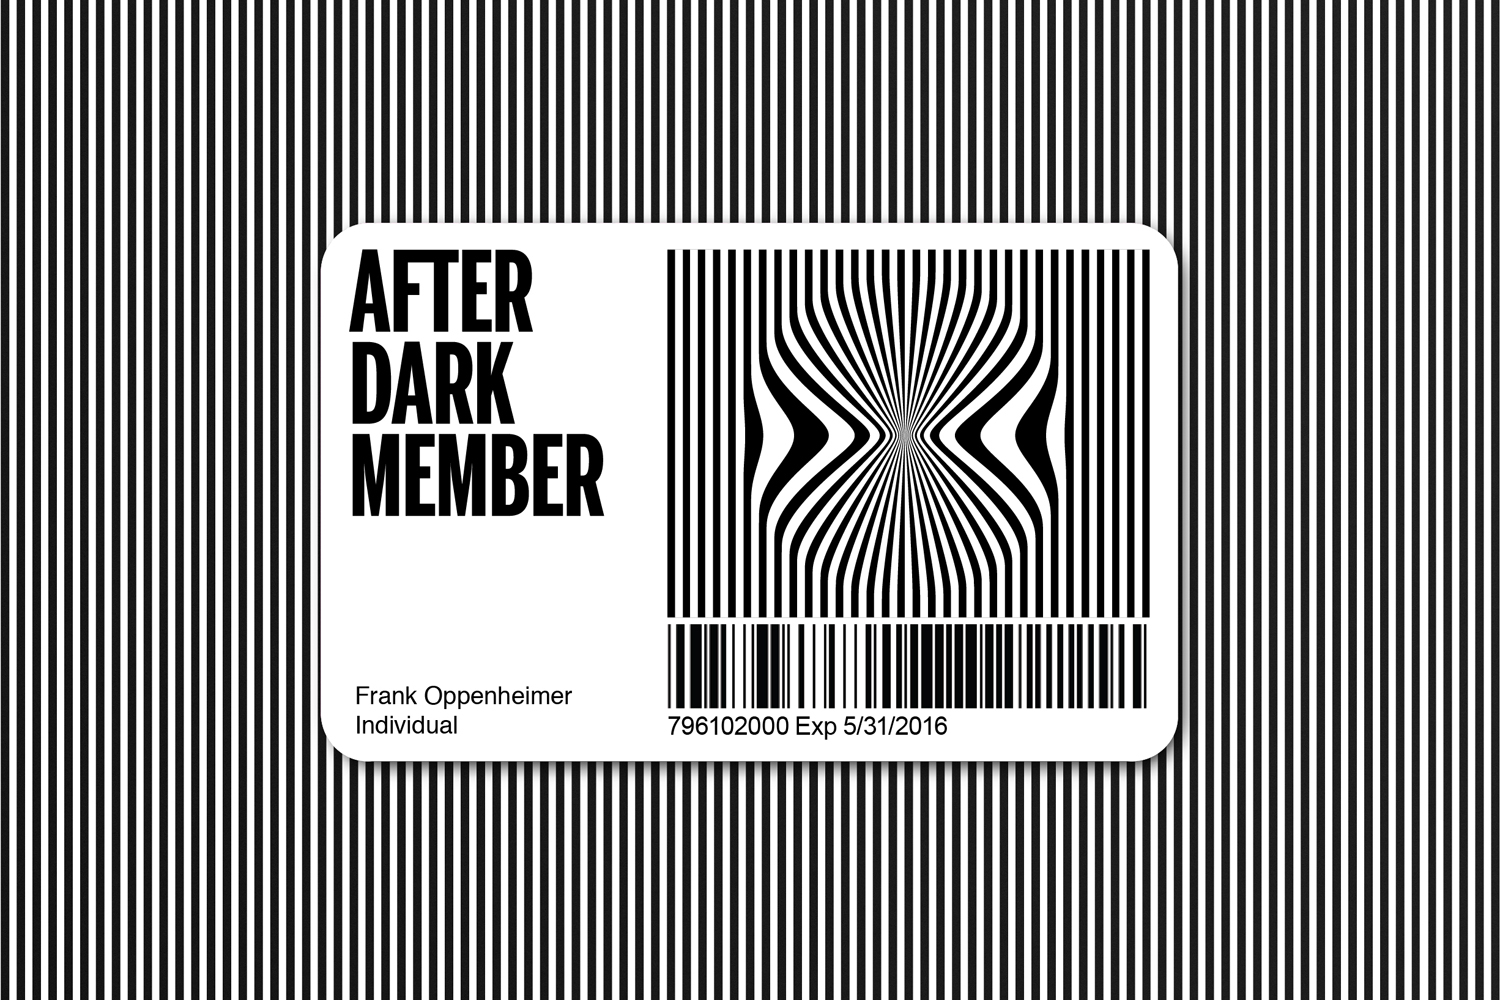 Visual identity and membership card by Collins for Exploratorium's After Dark, a weekly adults-only museum experience of perception